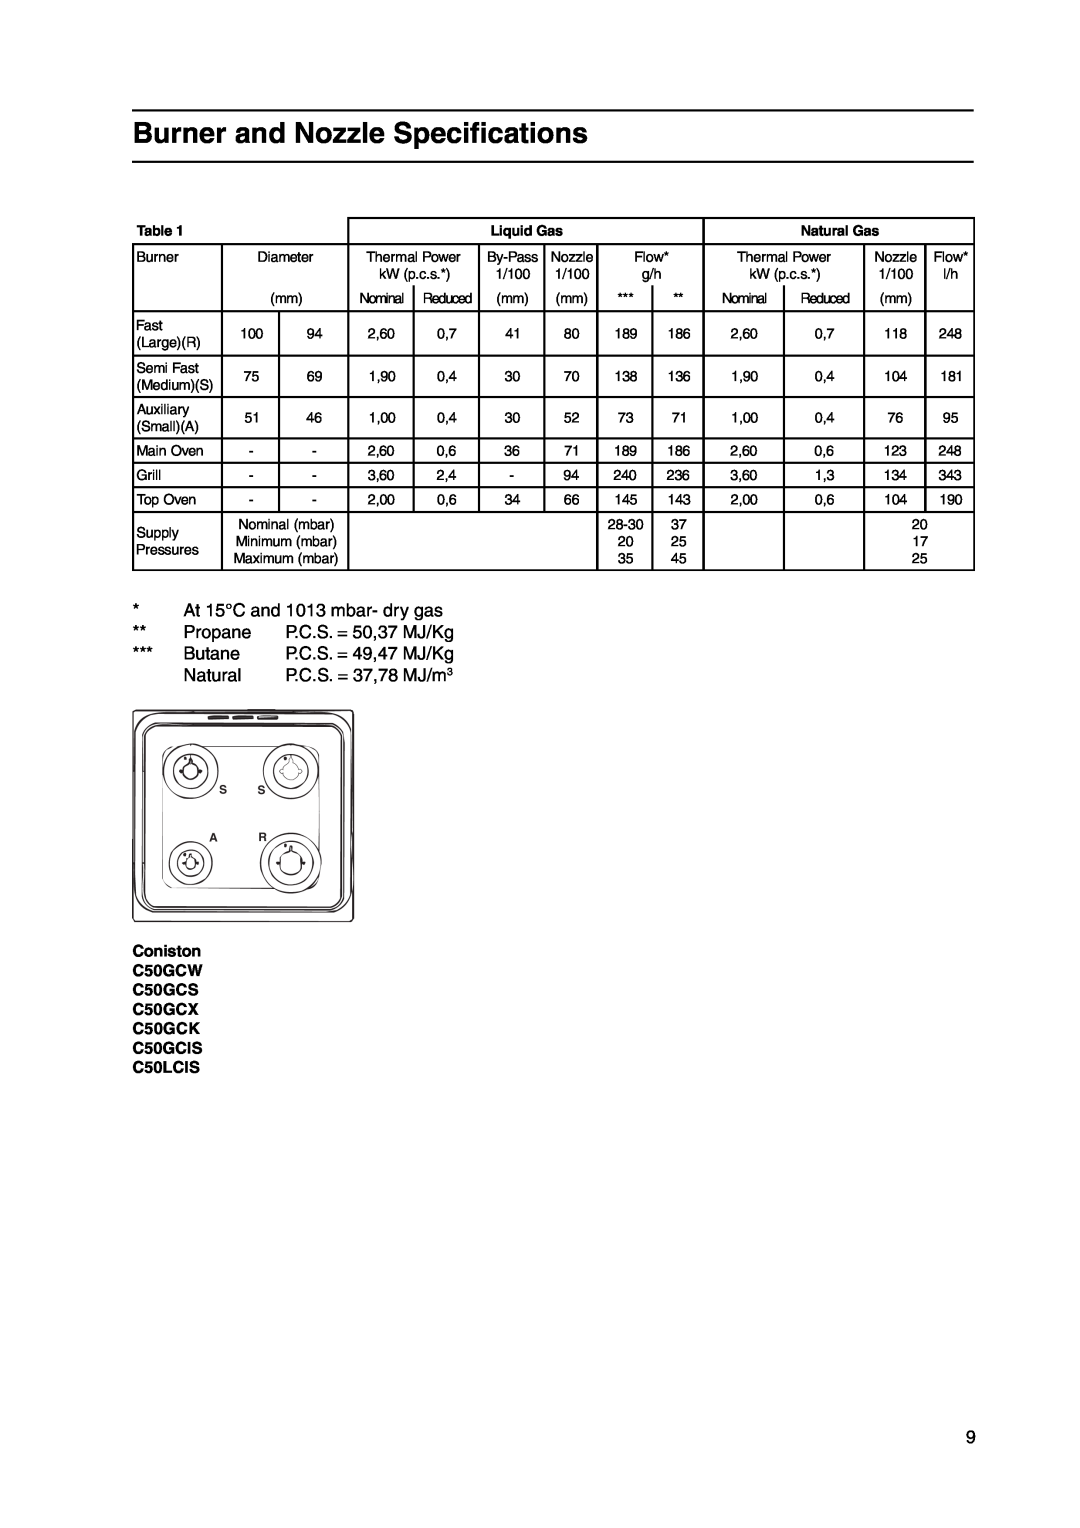 Cannon C50GCX, C50GCK, C50GCS Burner and Nozzle Specifications, At 15C and 1013 mbar- dry gas, Propane, Butane, Natural 